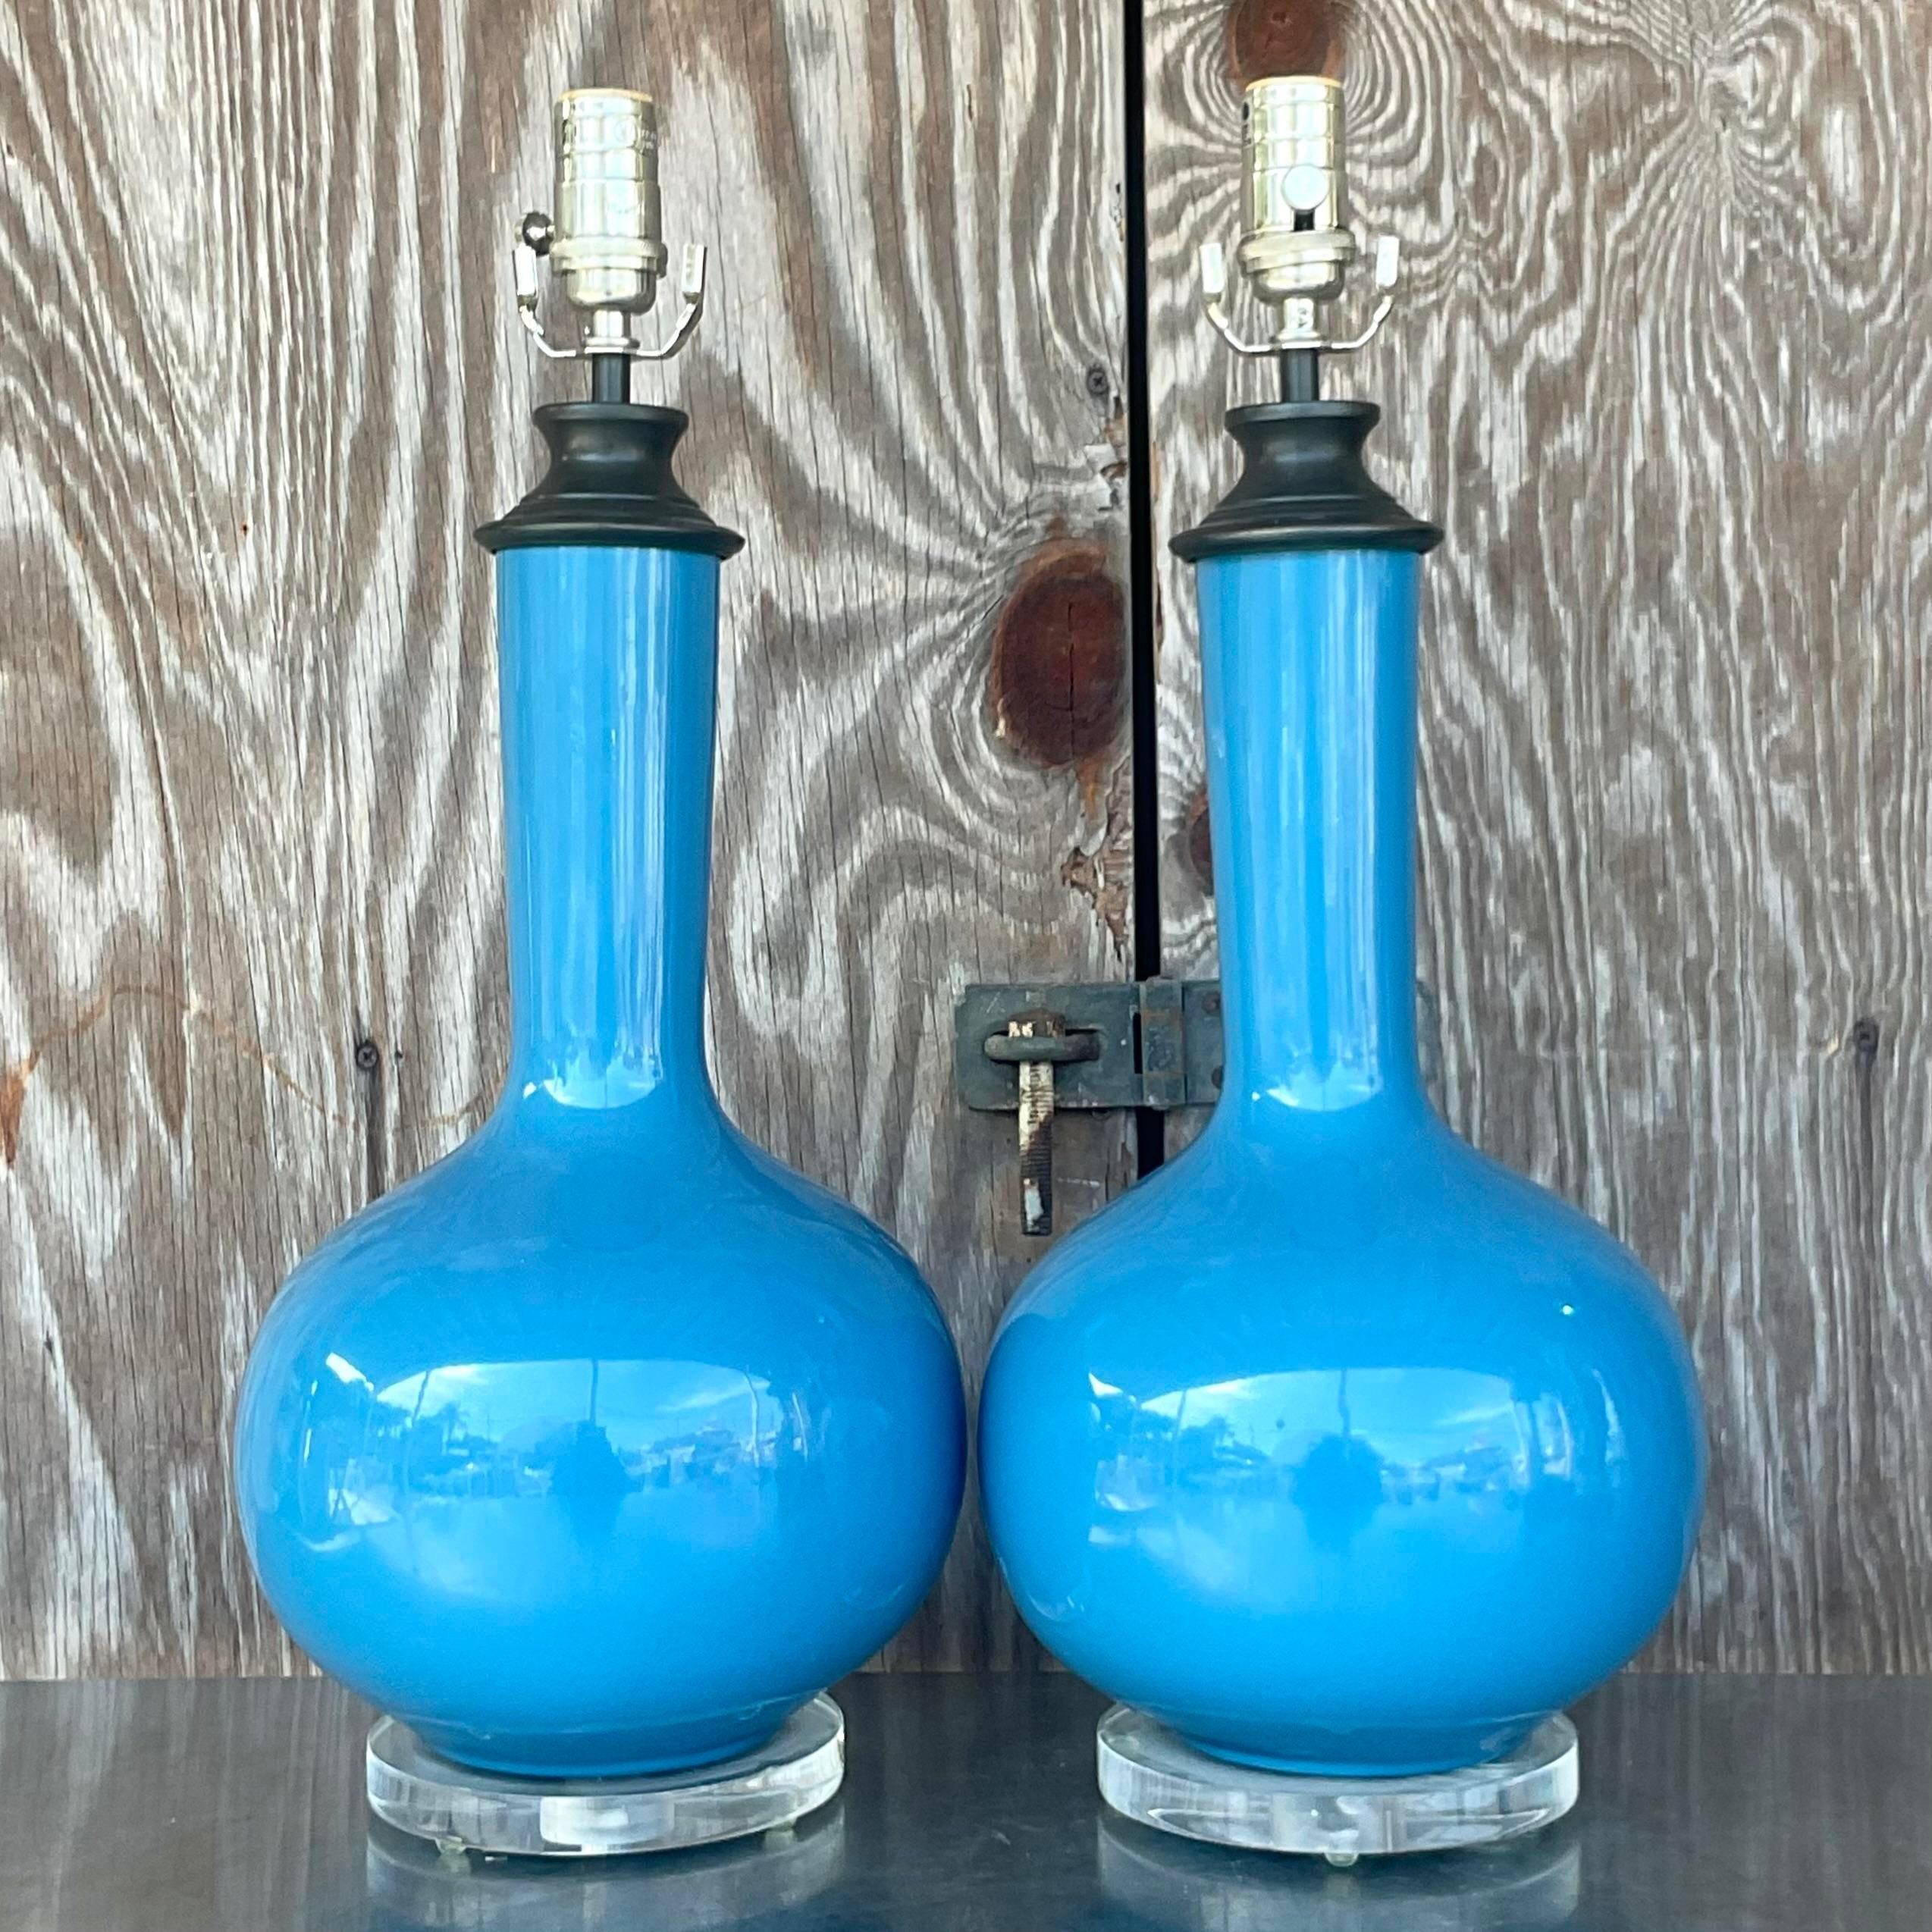 A fabulous pair of vintage Regency table lamps. Brilliant blue onion bulbs on lucite plinths. Acquired from a Palm Beach estate.